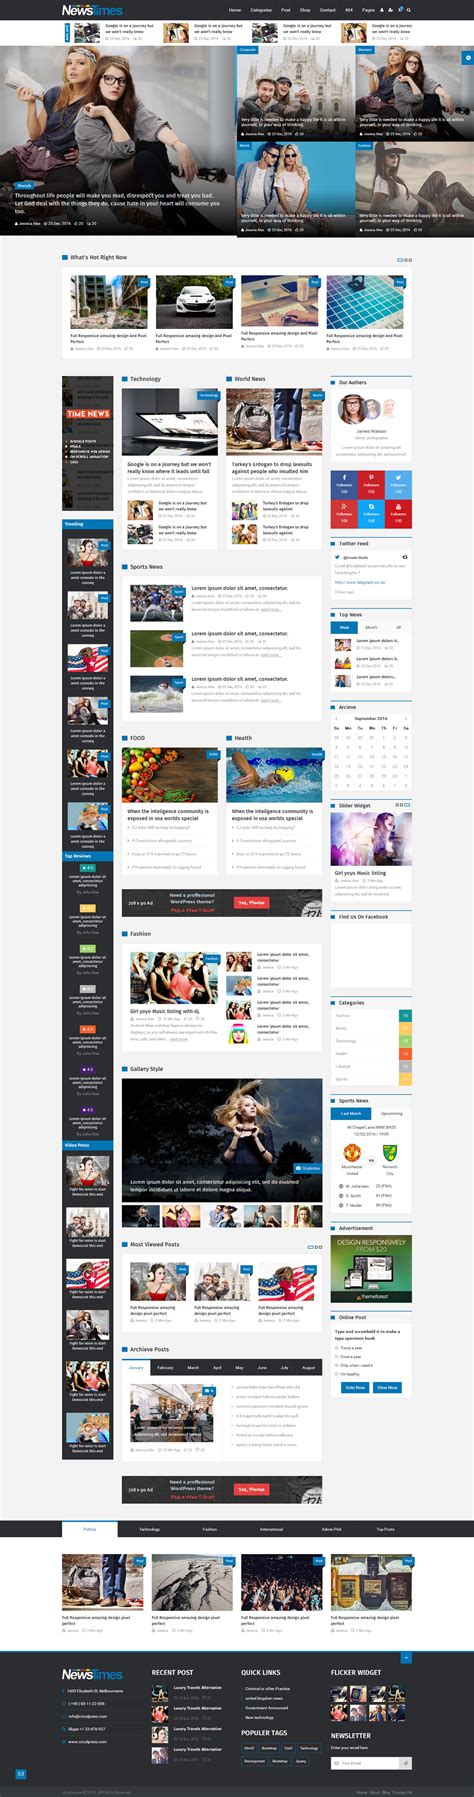 Free Sample HTML Web Page Templates Of Latest Free Web Page Templates ...